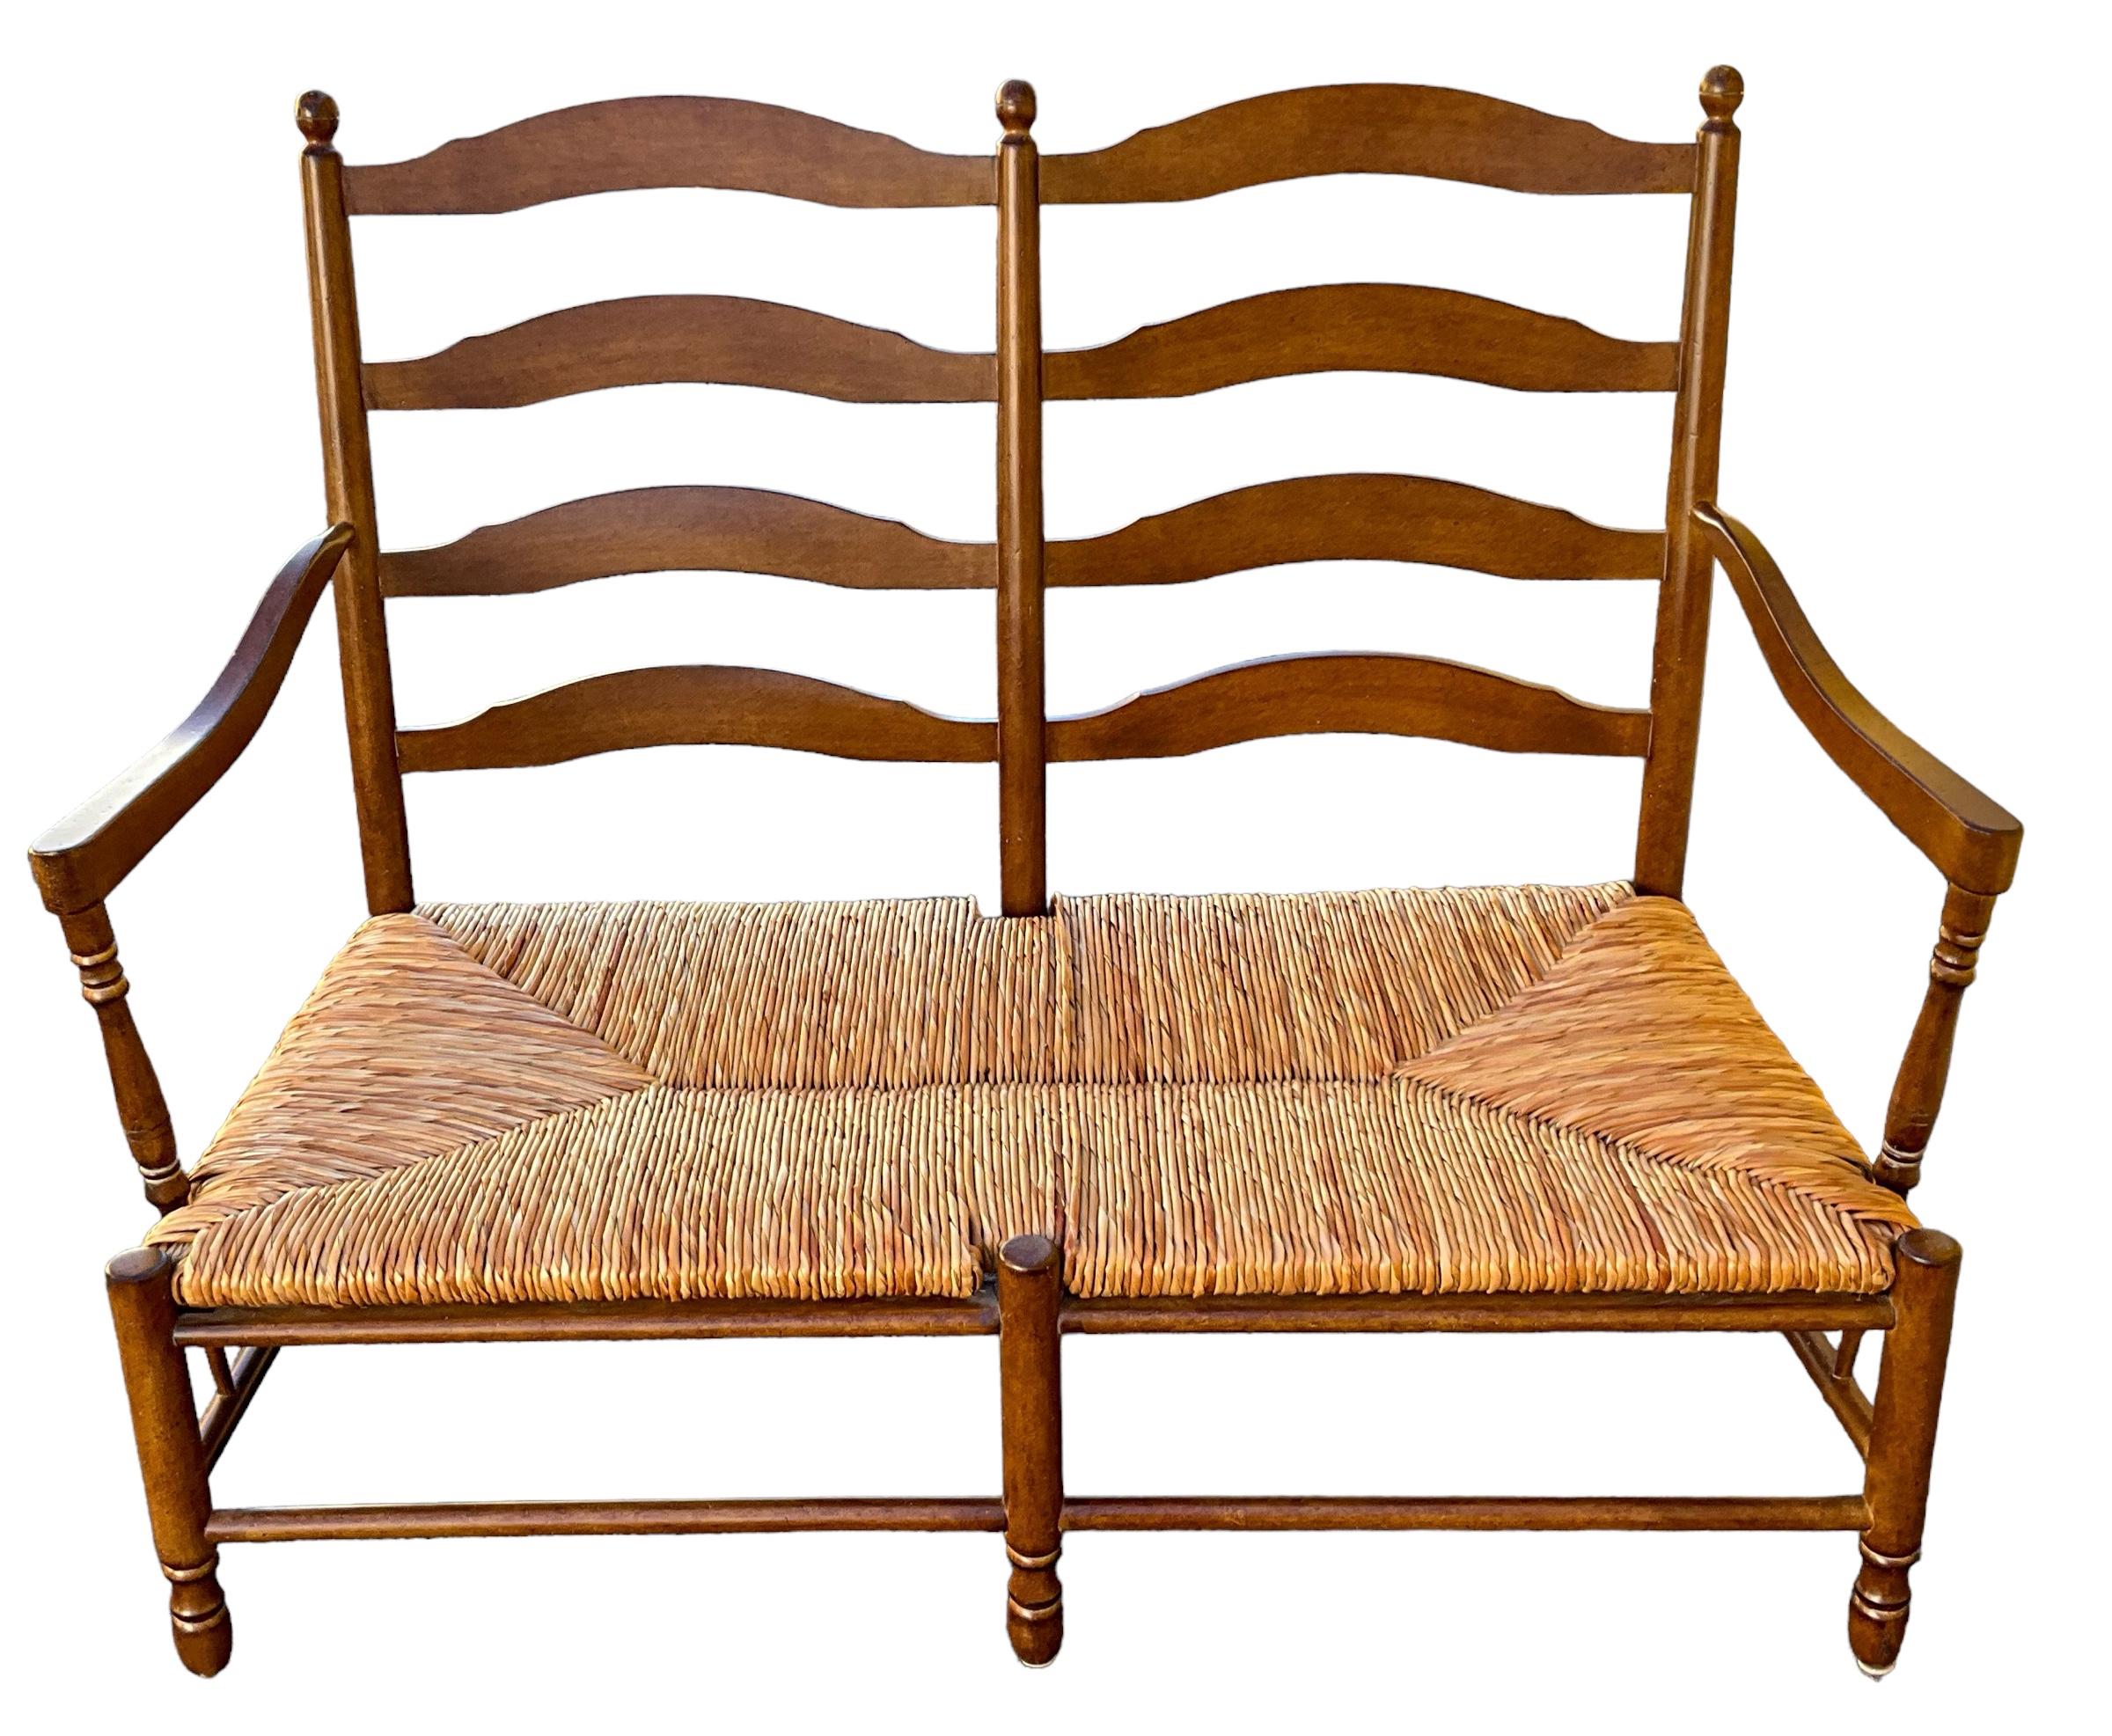 20th-C. French Country Carved Maple Settee W/ Rush Seat Att. To Pierre Deux  In Good Condition For Sale In Kennesaw, GA